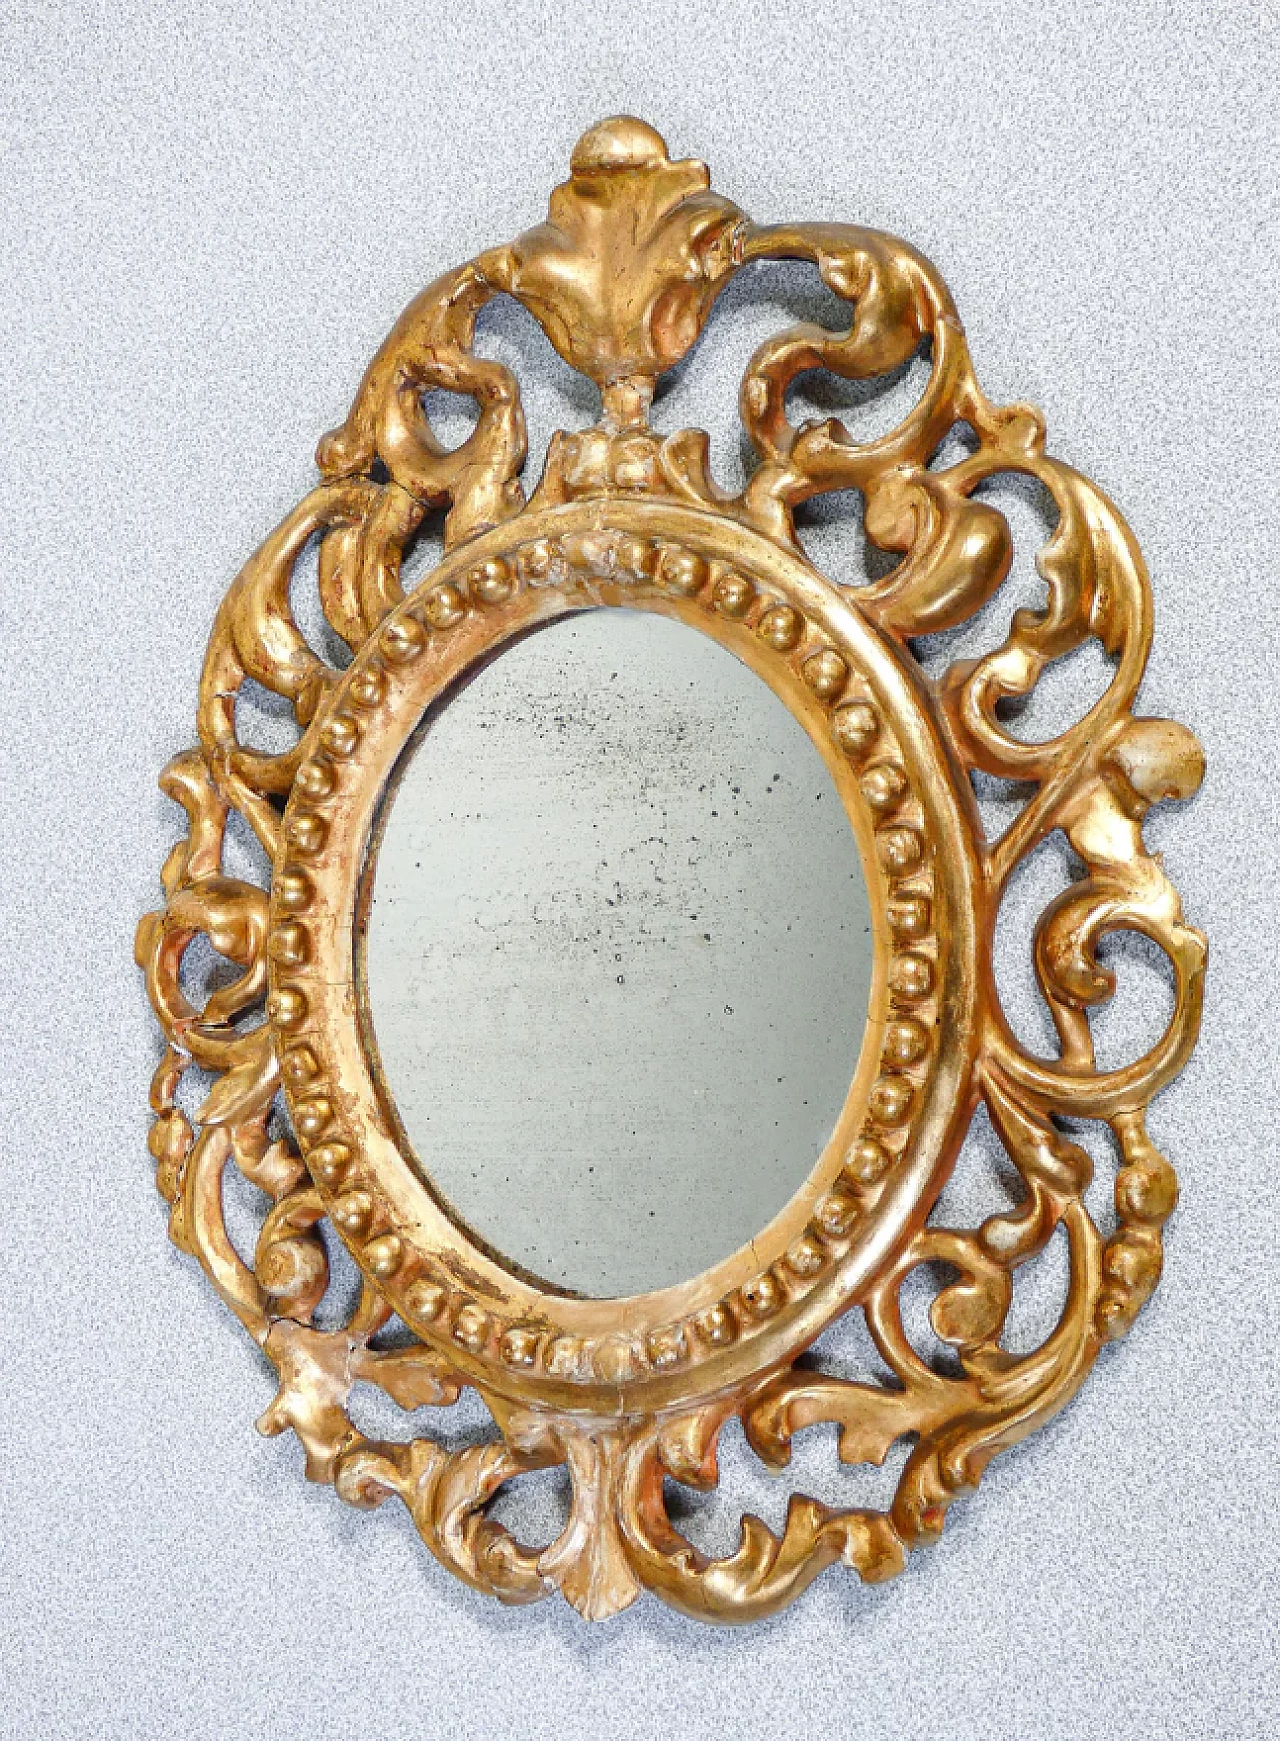 Carved wooden mirror gilded with gold leaf, 18th century 2